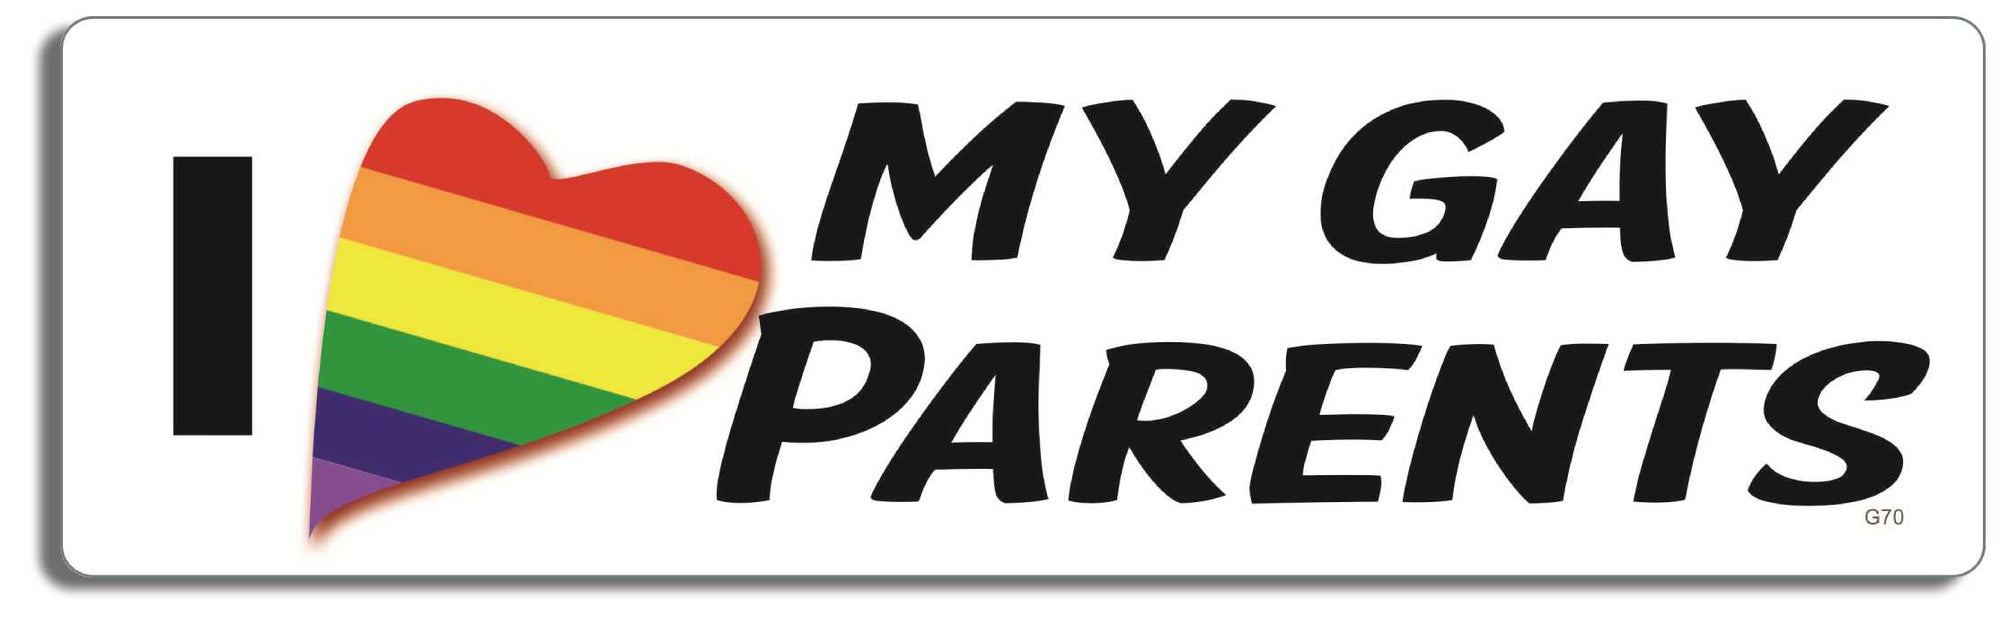 I heart my gay parents - 3" x 10" -  Decal Bumper Sticker-LGBT Bumper Sticker Car Magnet I heart my gay parents-  Decal for carsresist